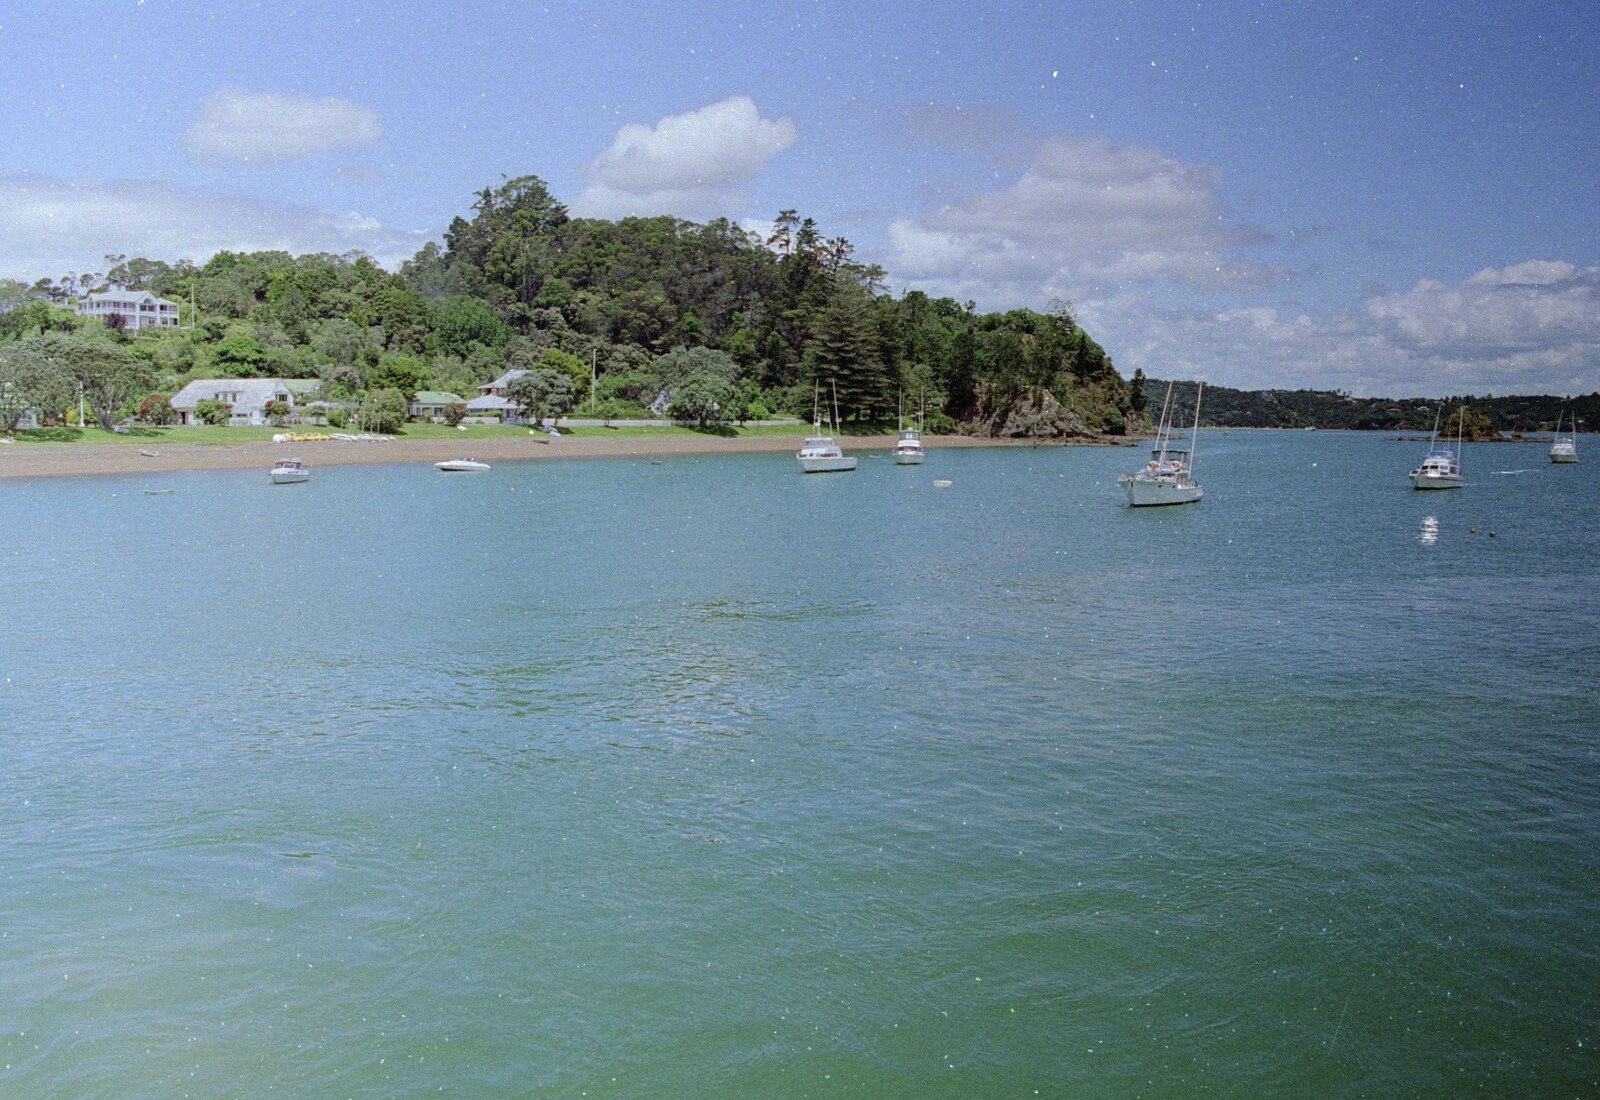 Sub-tropical waters from The Bay Of Islands, New Zealand - 29th November 1992